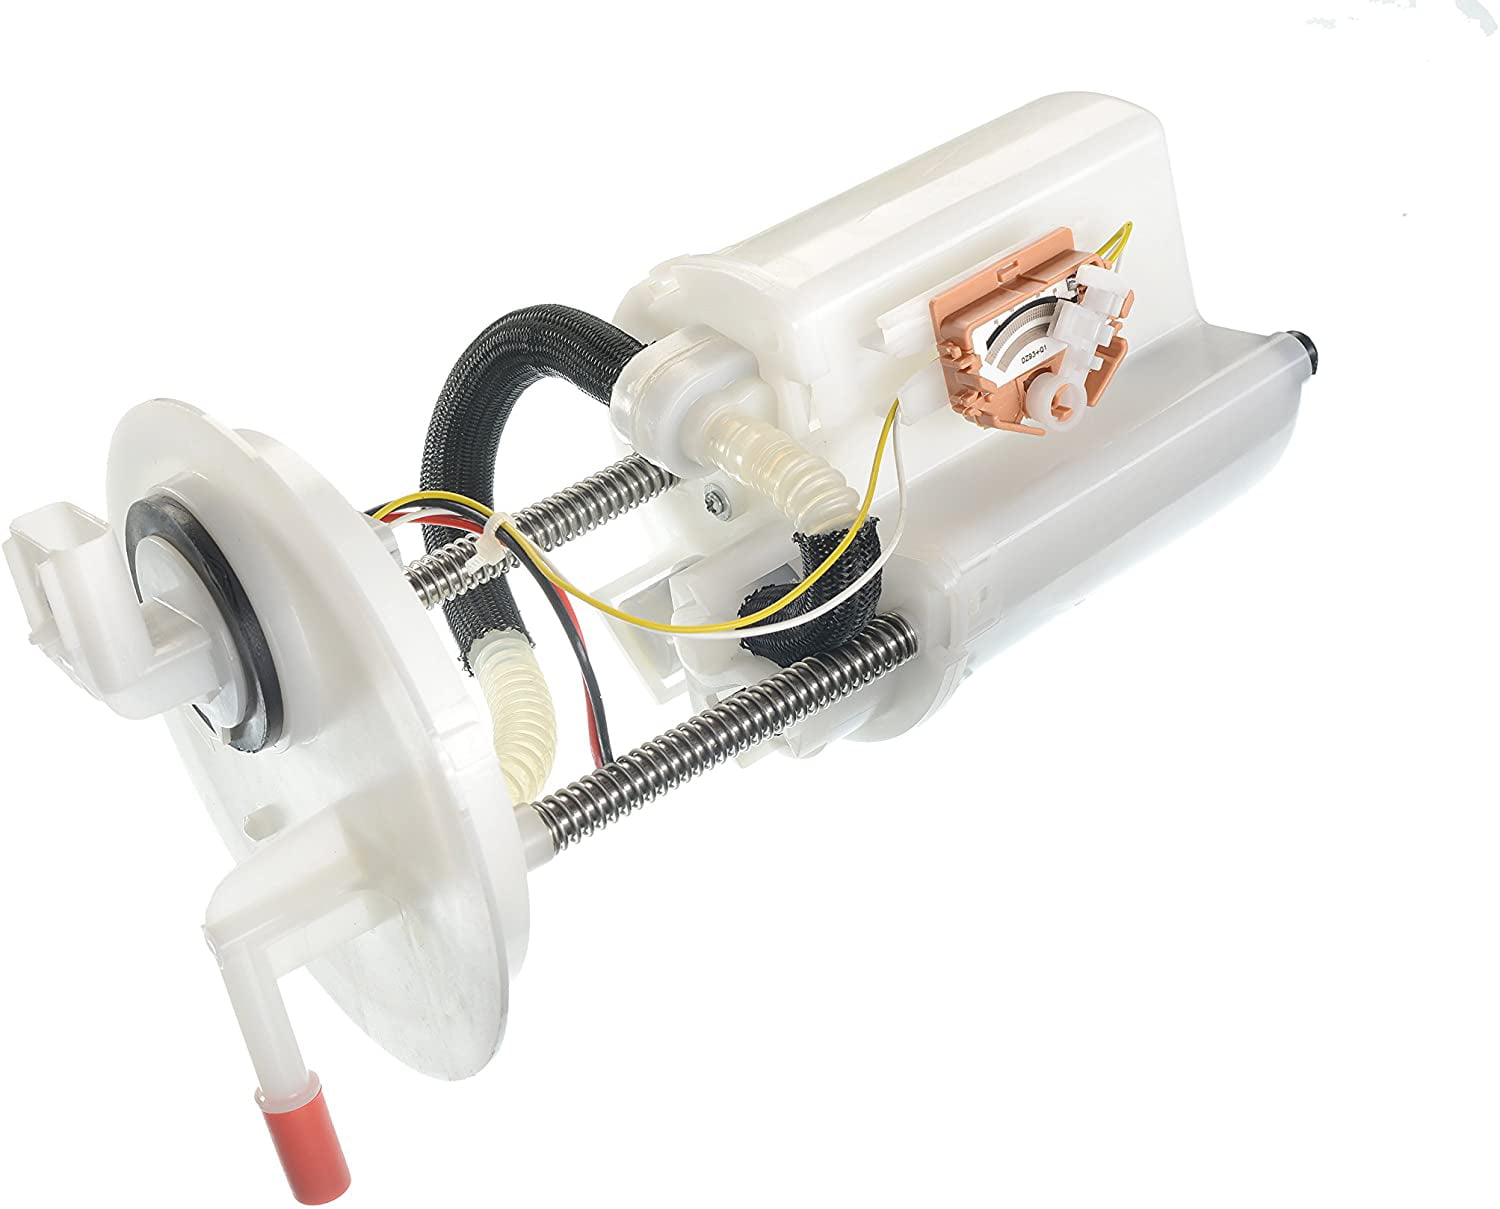 Fuel Pump Module Assembly for Ford Taurus 2005-2007 Mercury Sable 2004-2005 3.0L